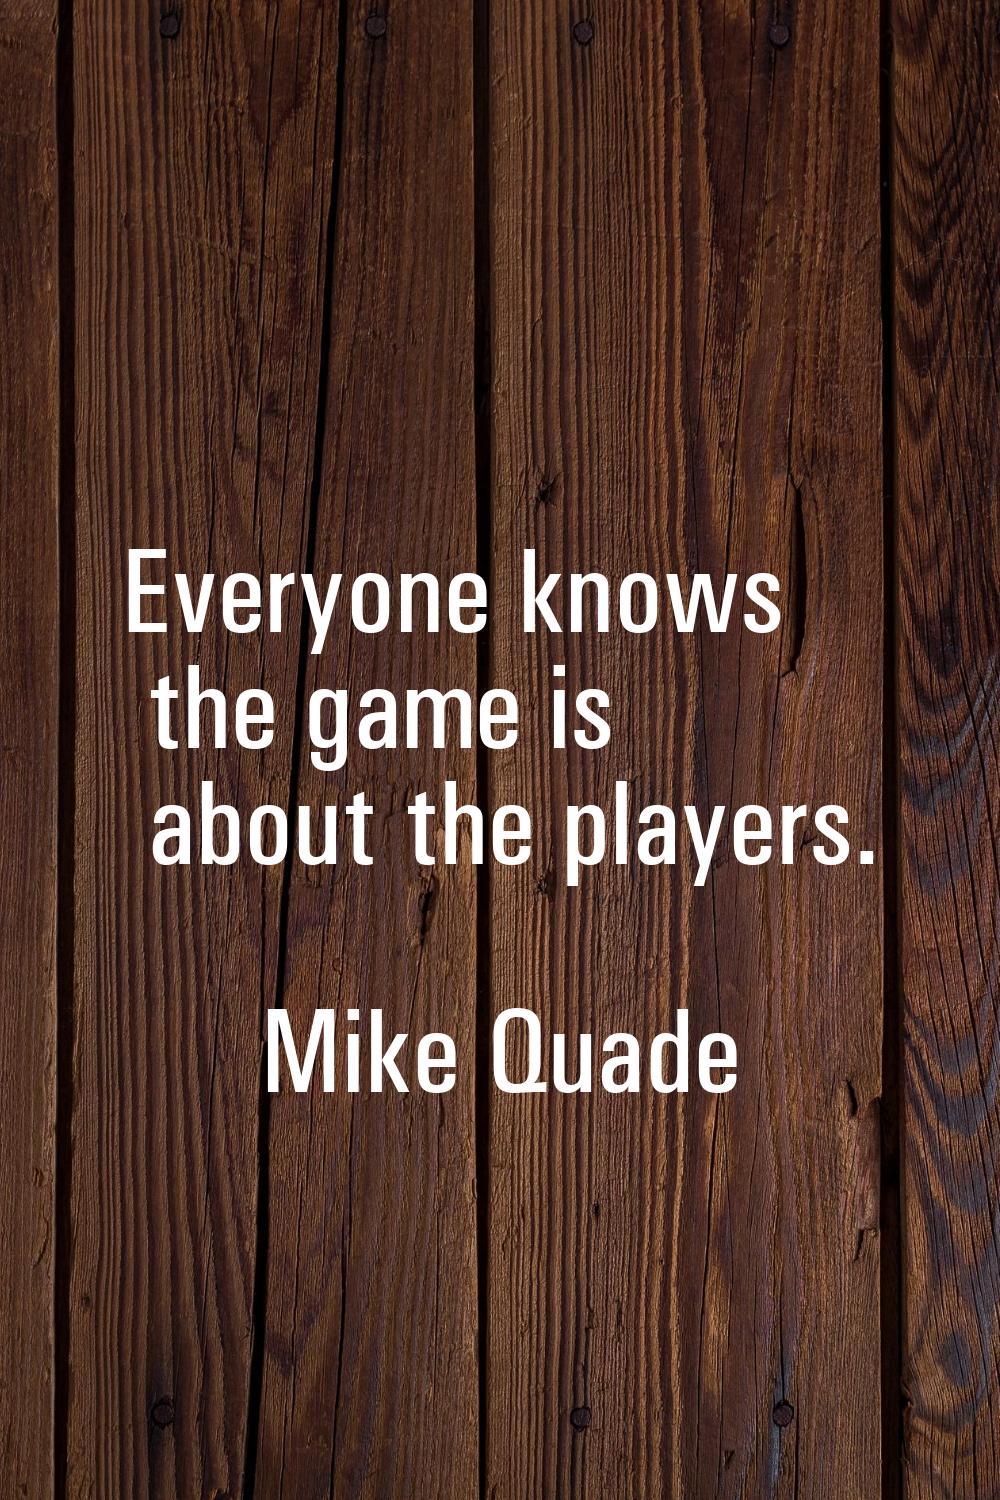 Everyone knows the game is about the players.